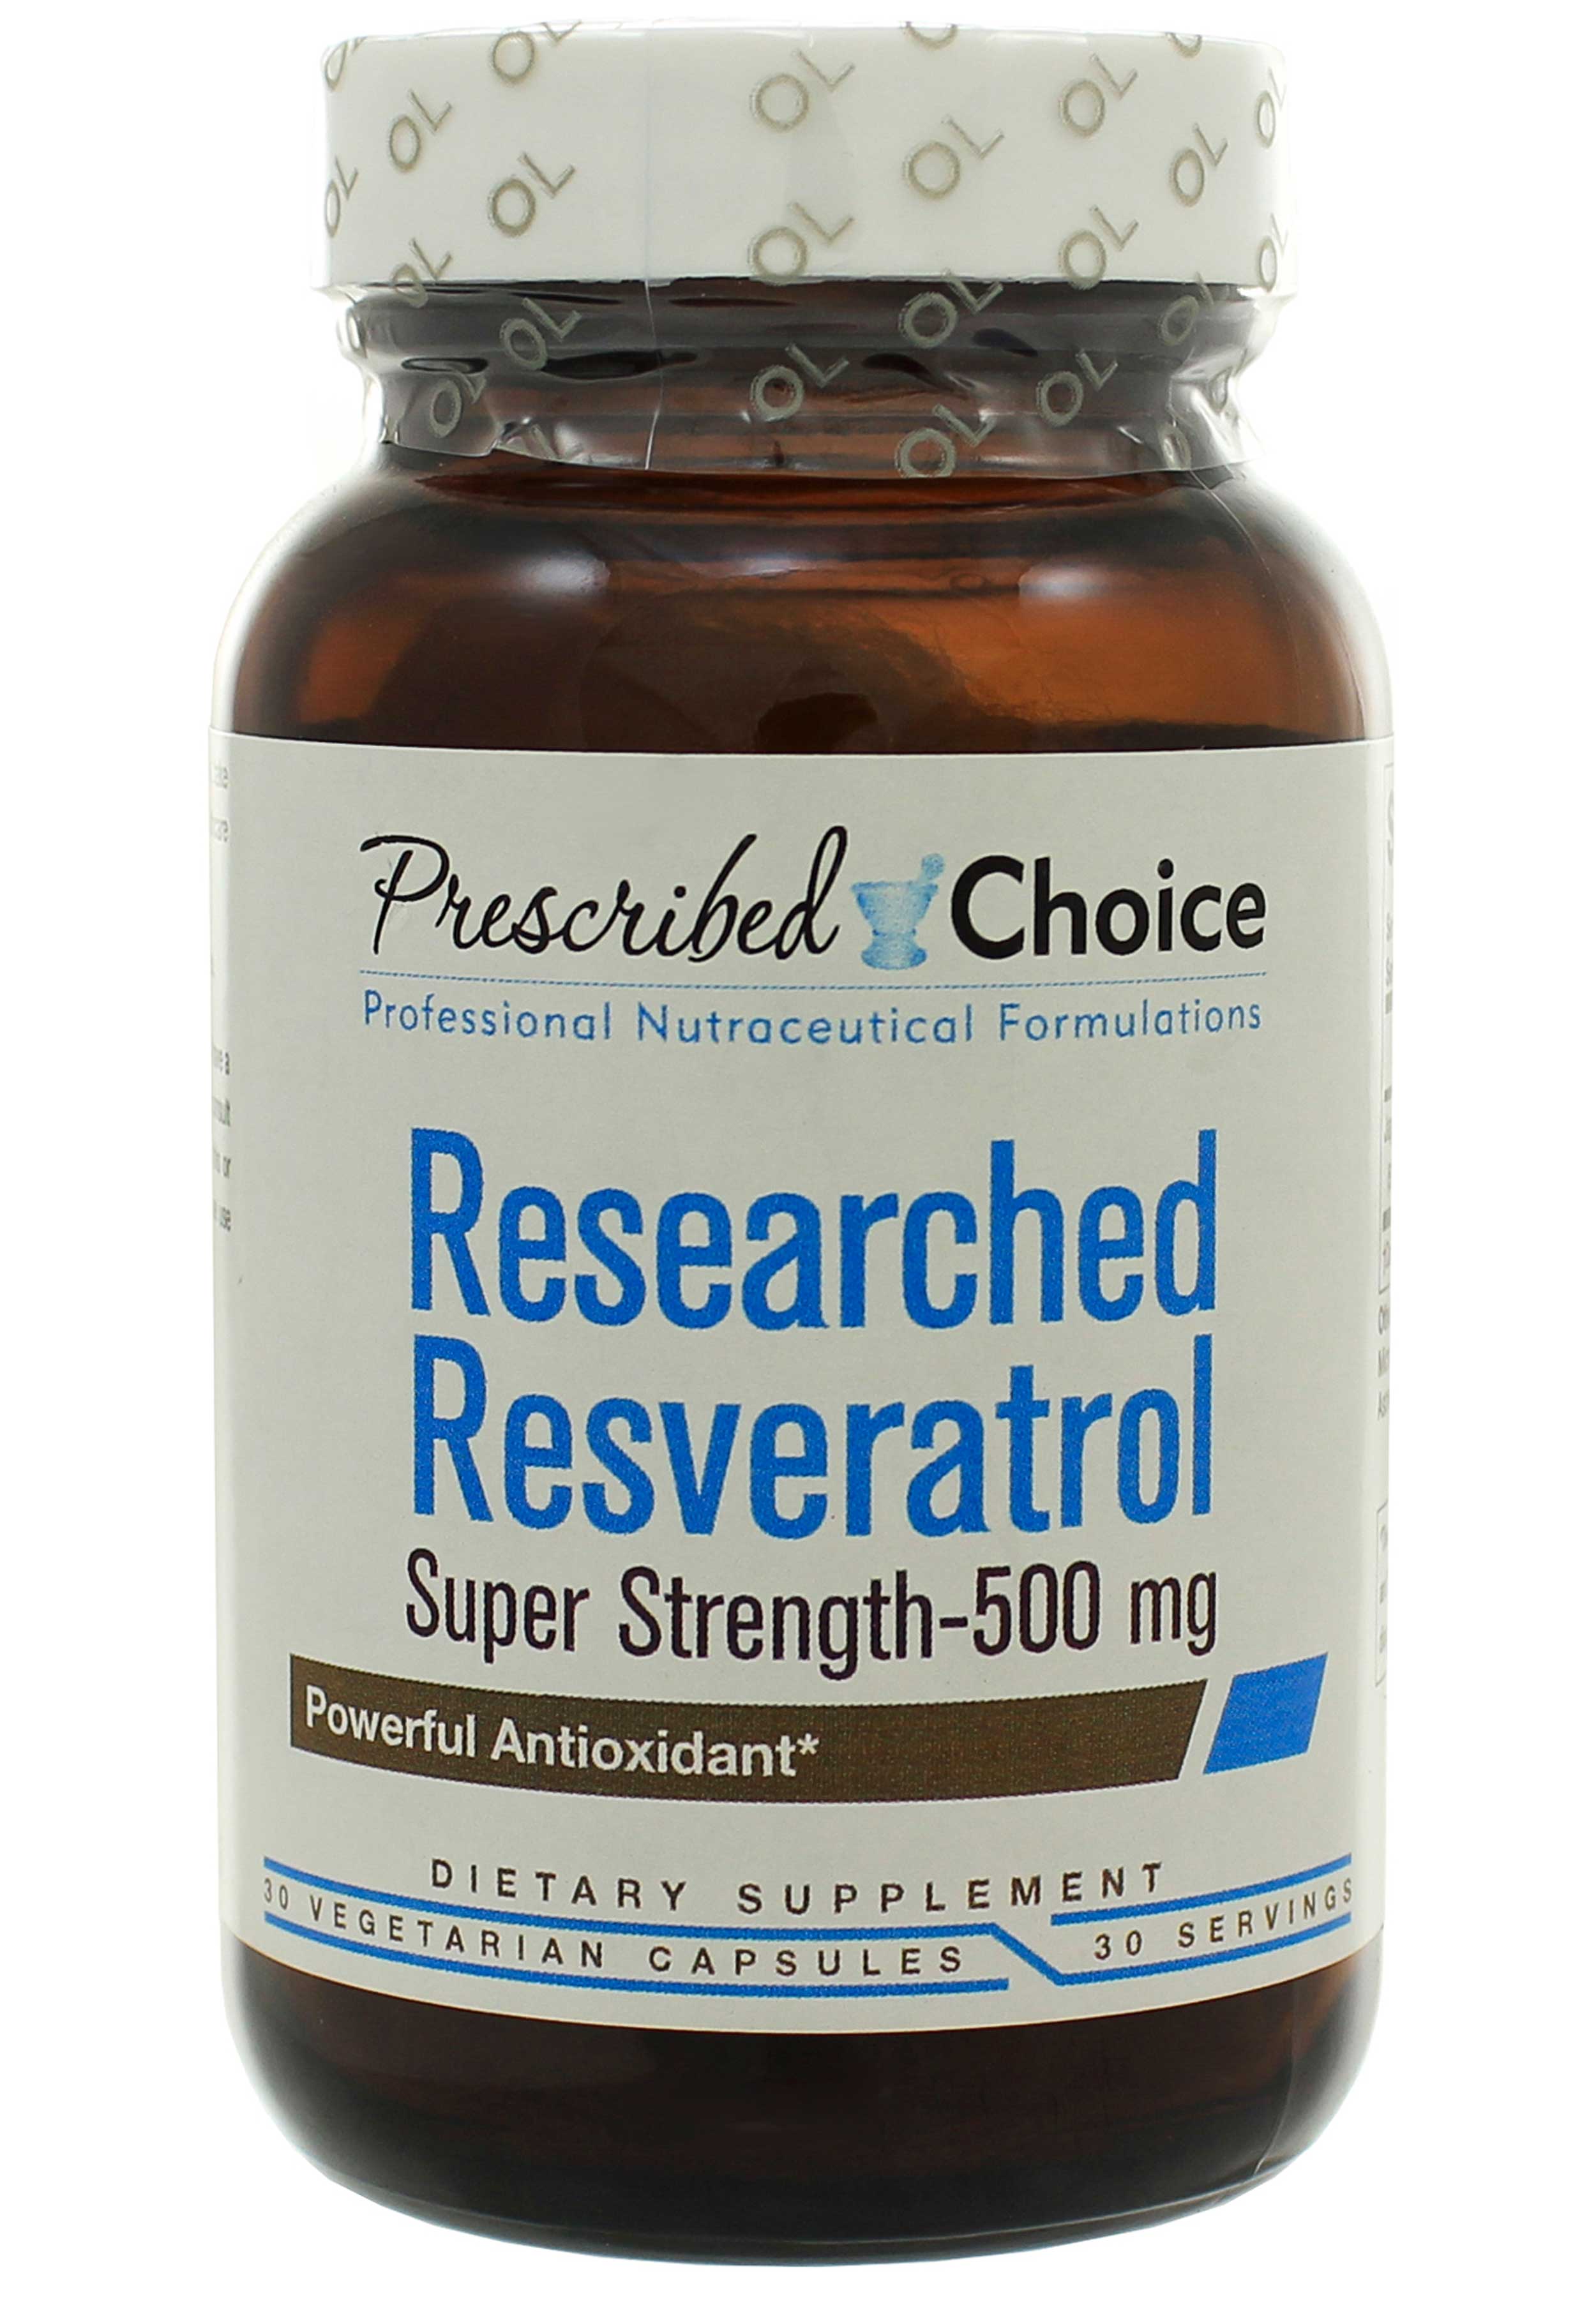 Prescribed Choice Researched Resveratrol 500 mg